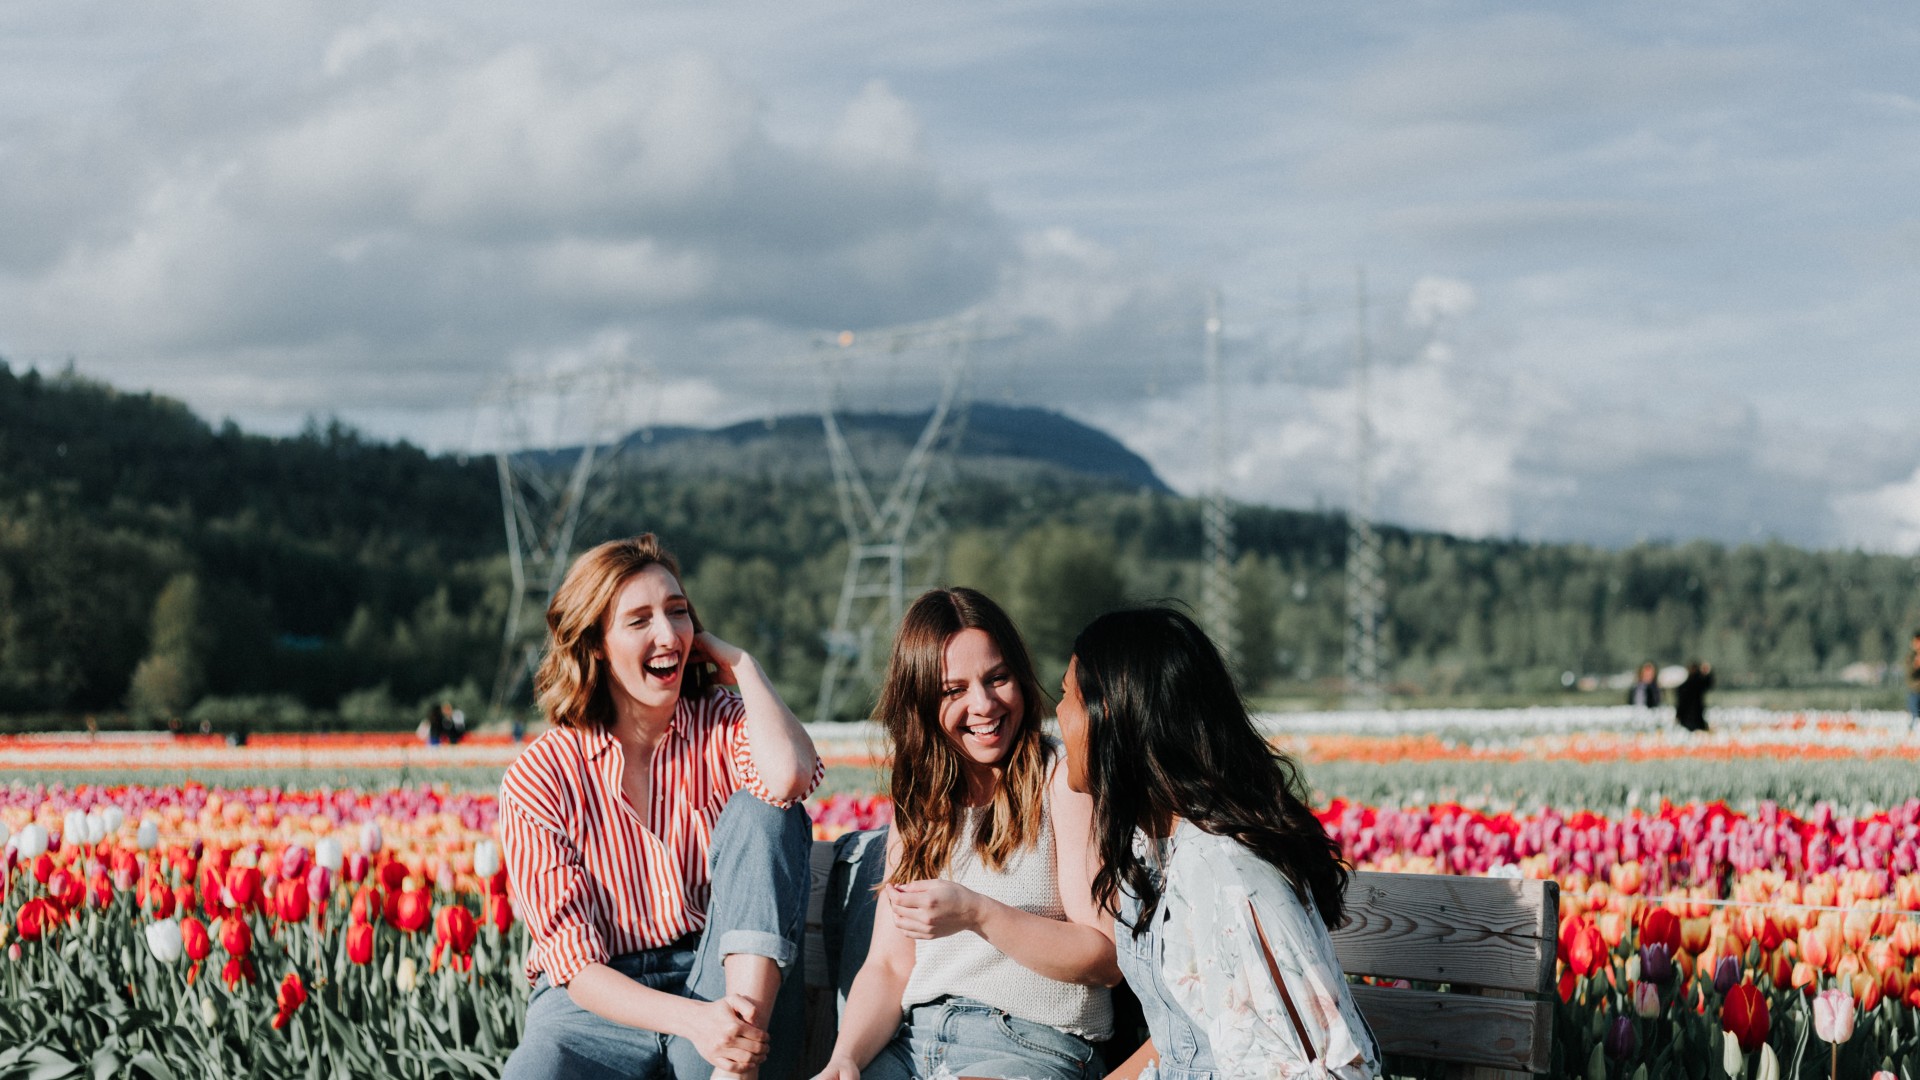 Three women share a laugh while visiting a tulip field.